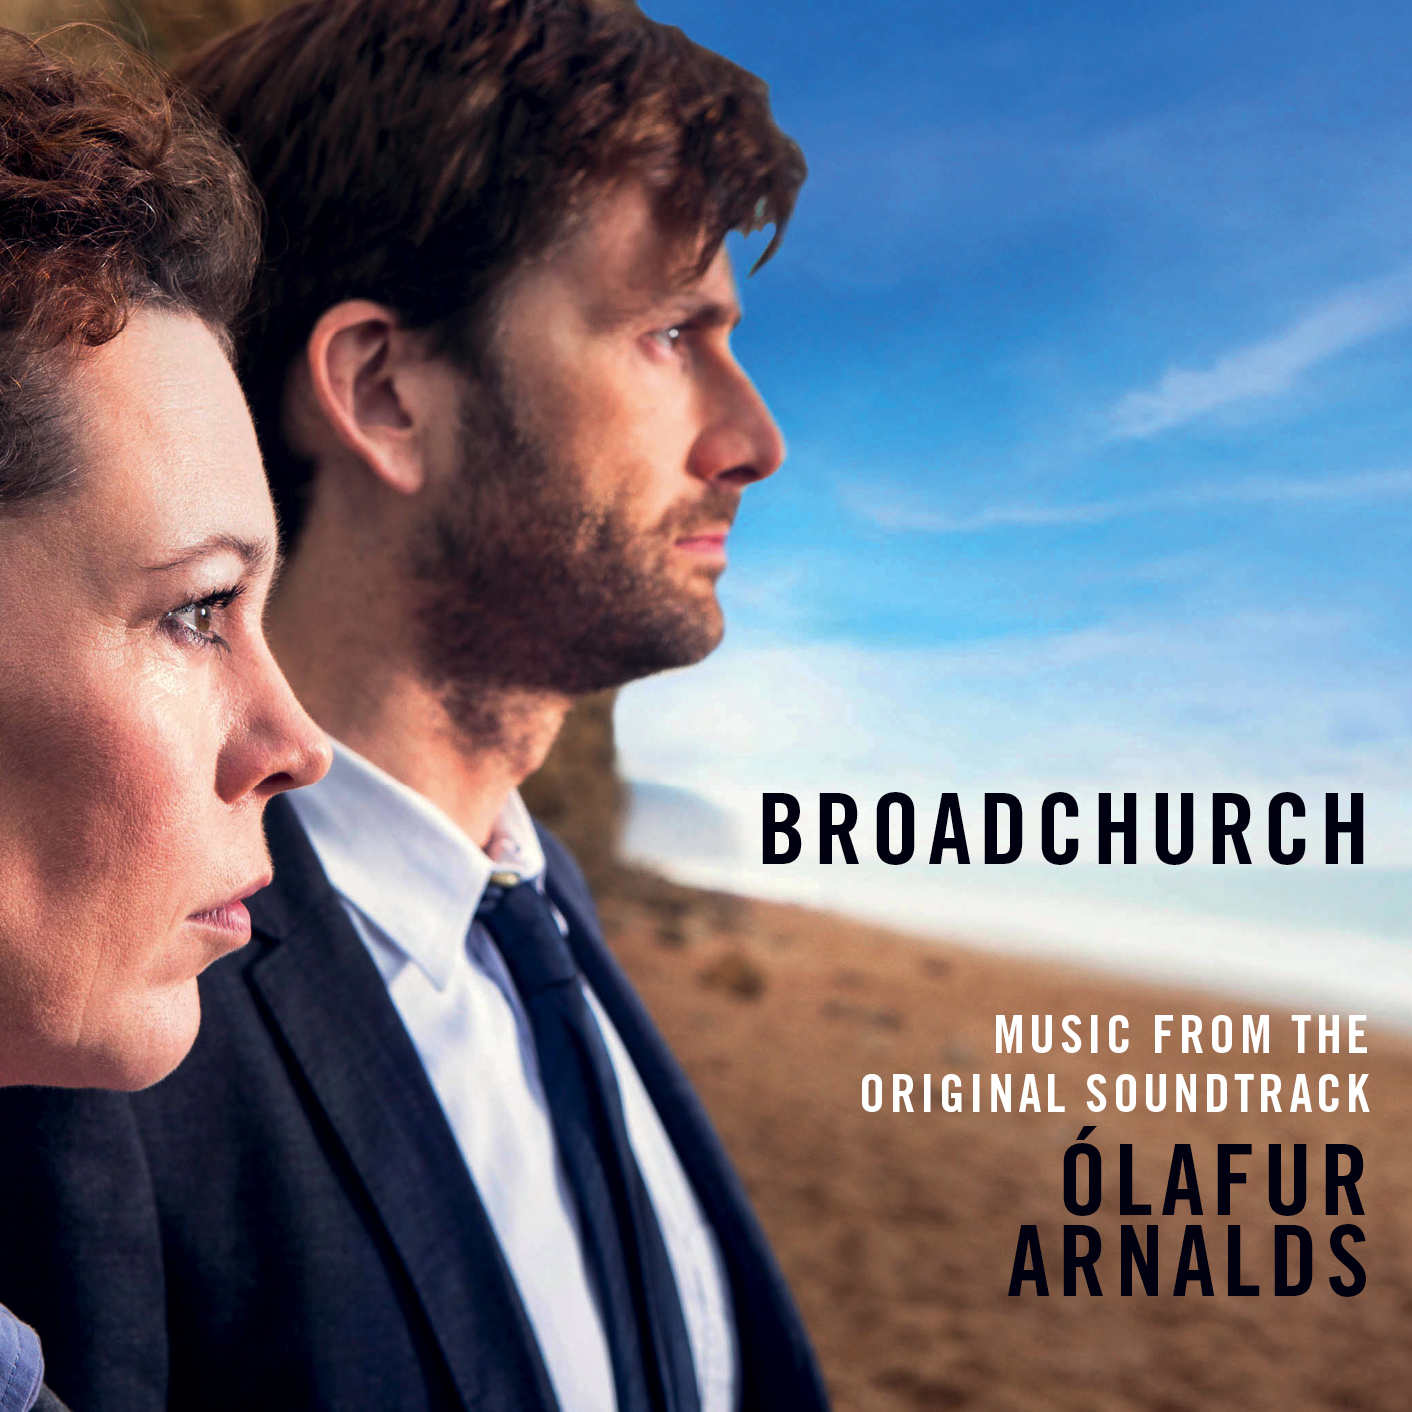 Buy The Broadchurch Soundtrack By Ólafur Arnalds From Today.